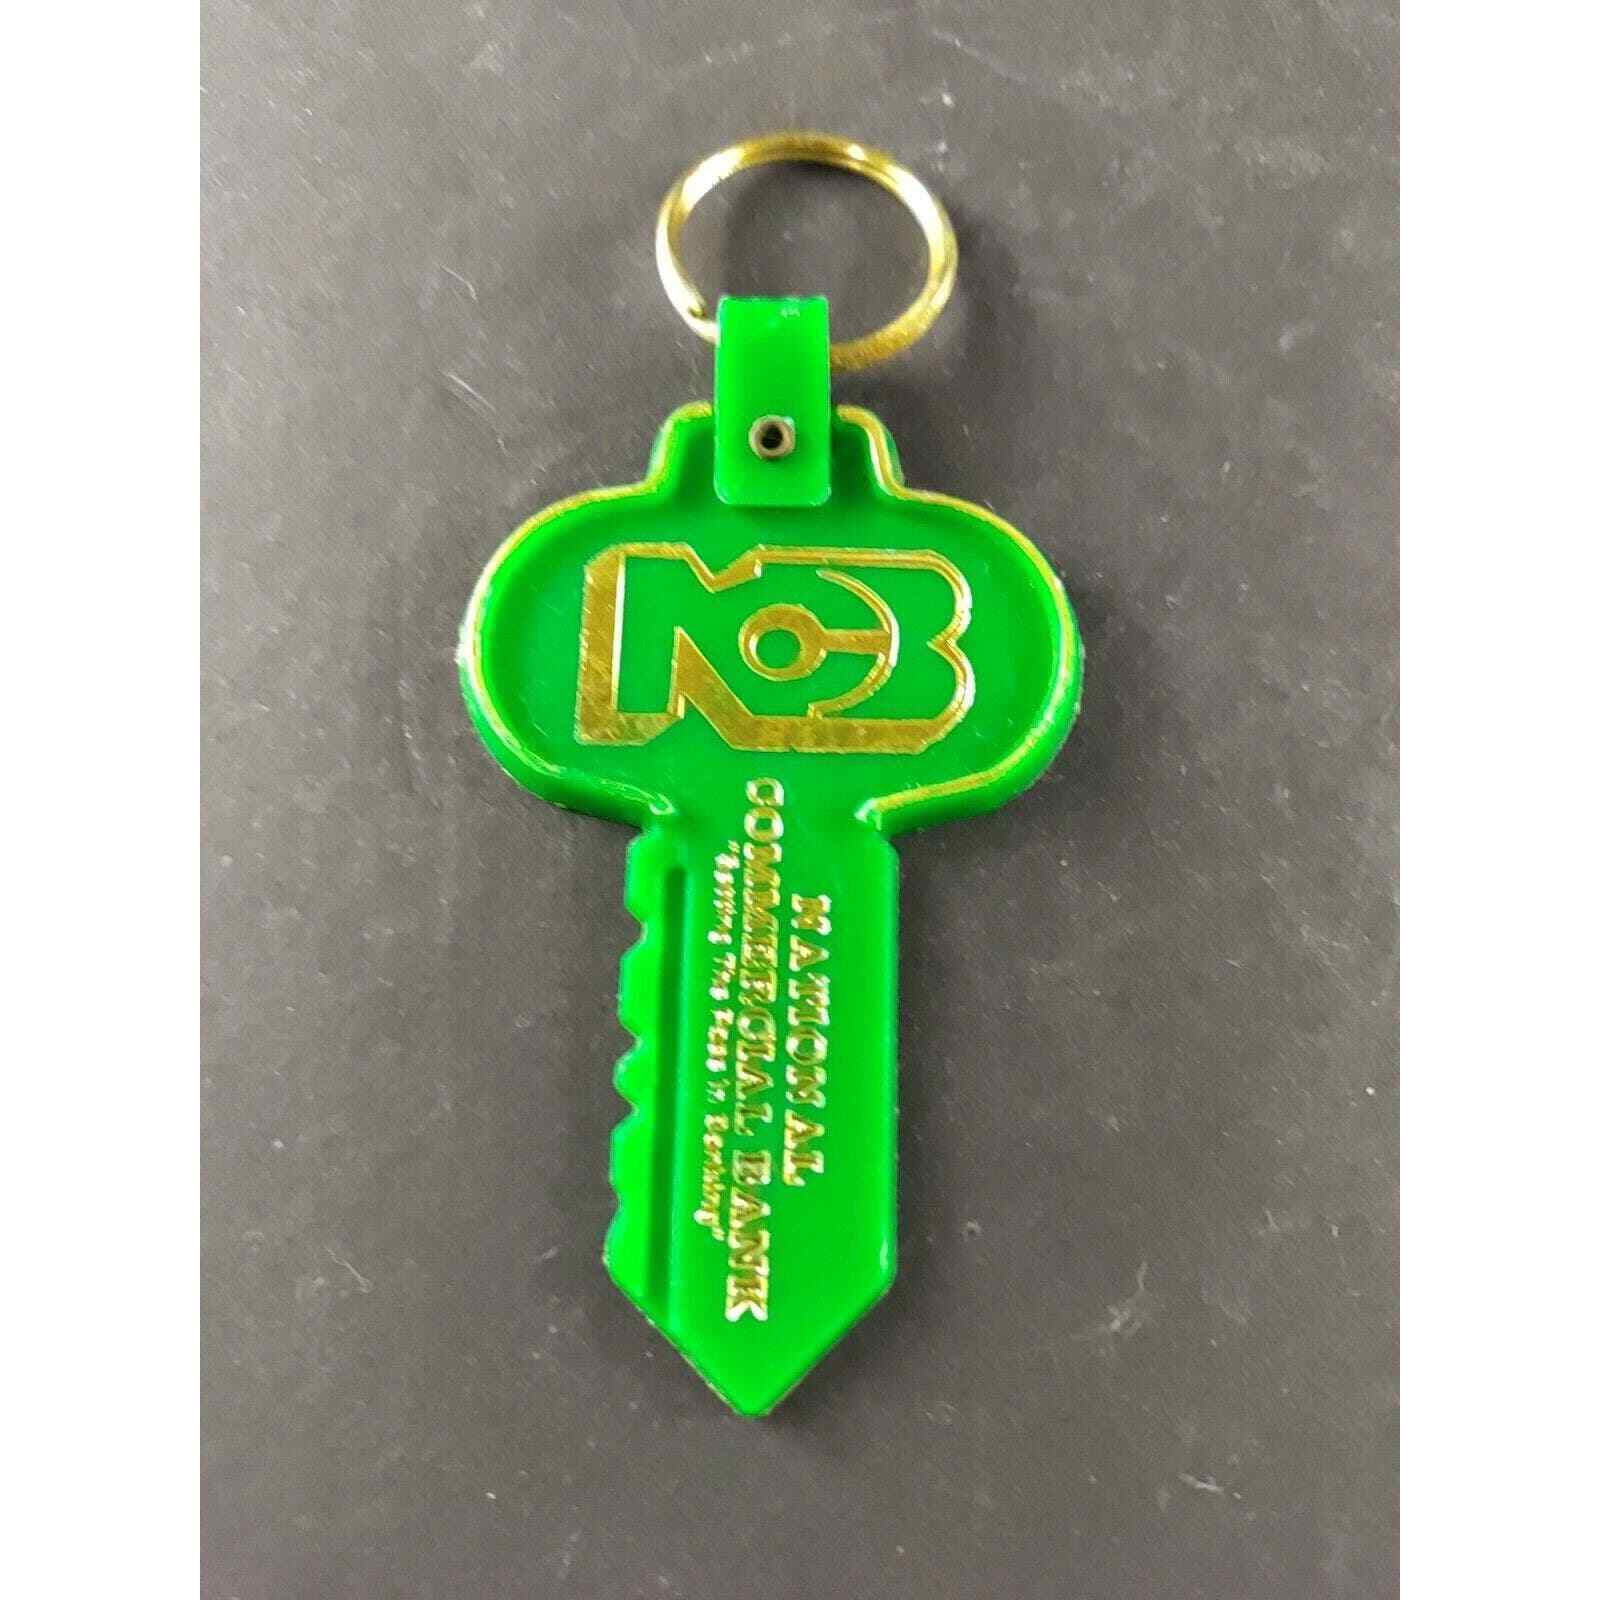 National Commercial Bank Thanks For Being The Key Keychain